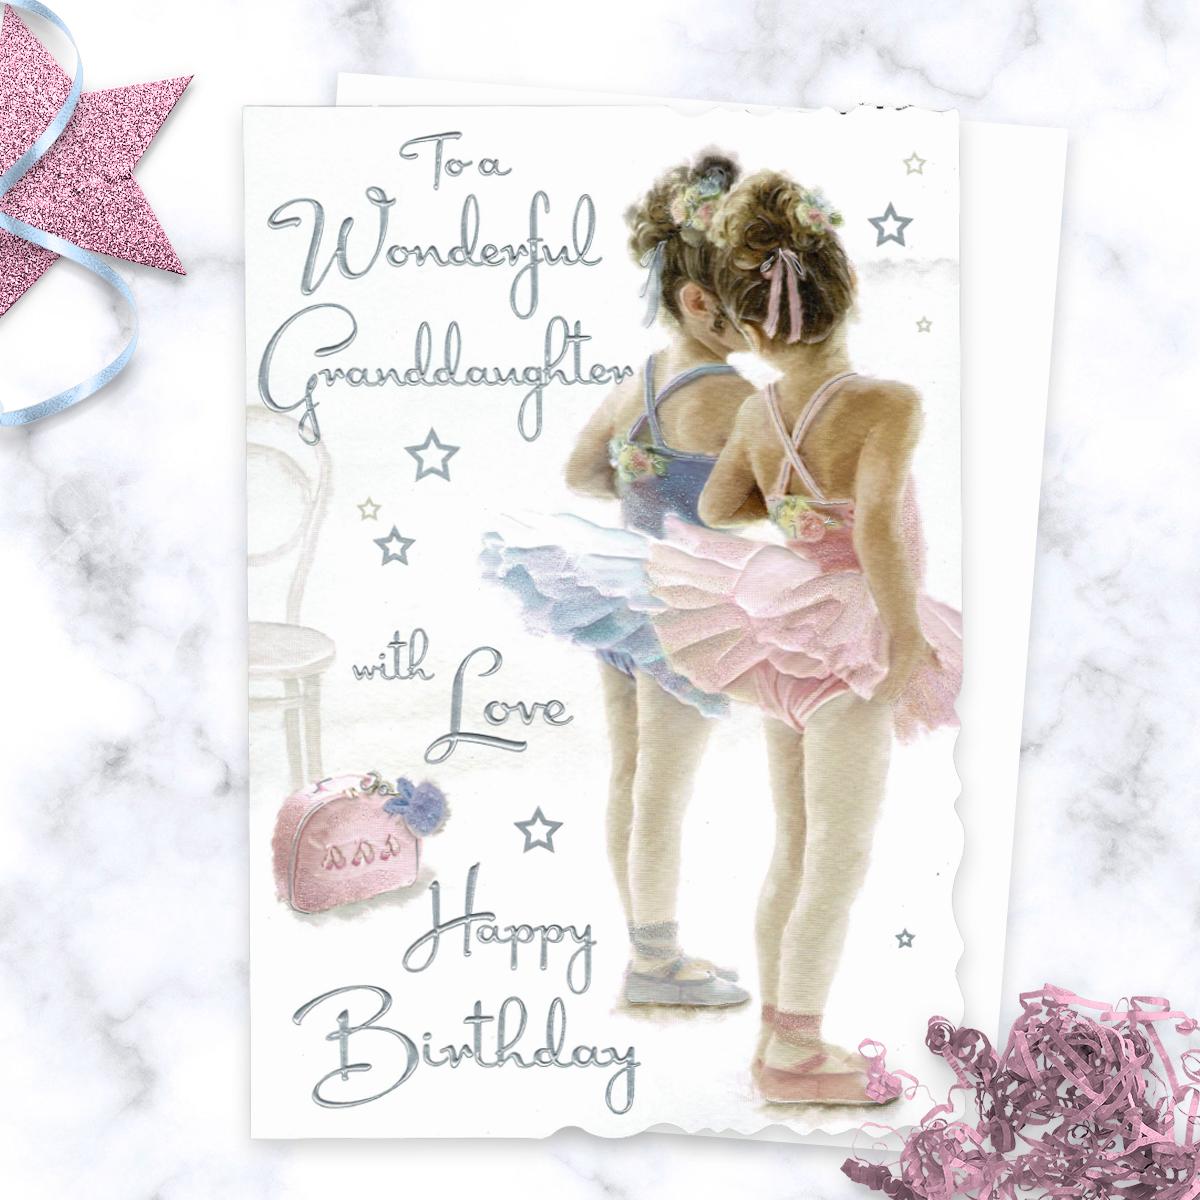 To A Wonderful Granddaughter  With Love Happy Birthday' Card Featuring Two Little Girls Dressed For Ballet Class! With Added Sparkle And Silver Foil Detail. Complete With White Envelope